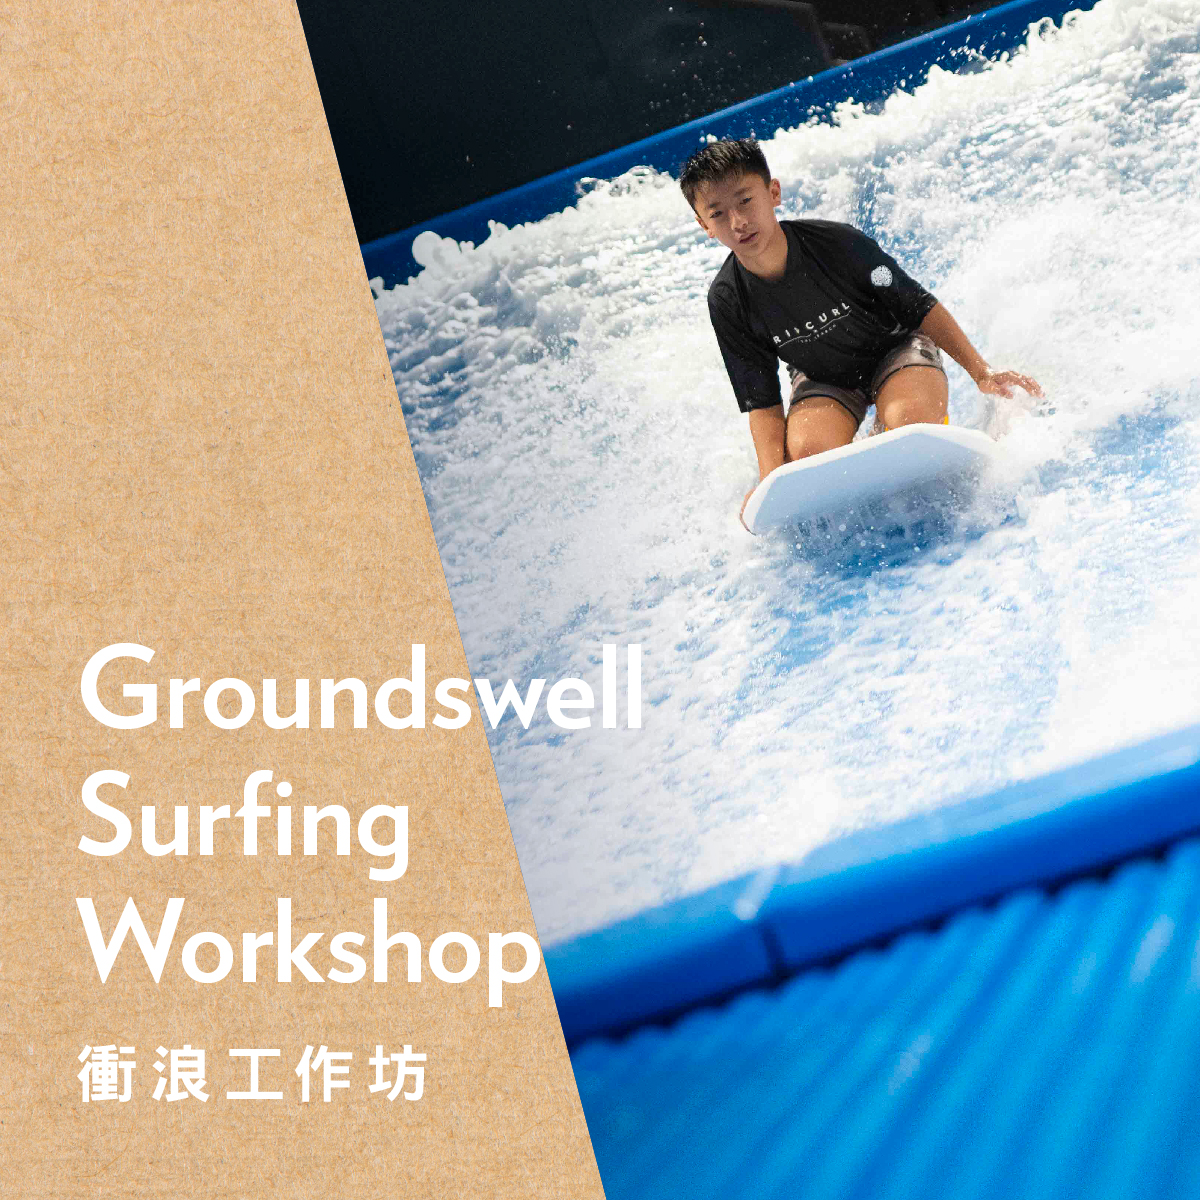 AIRSIDE Groundswell Surfing Workshop